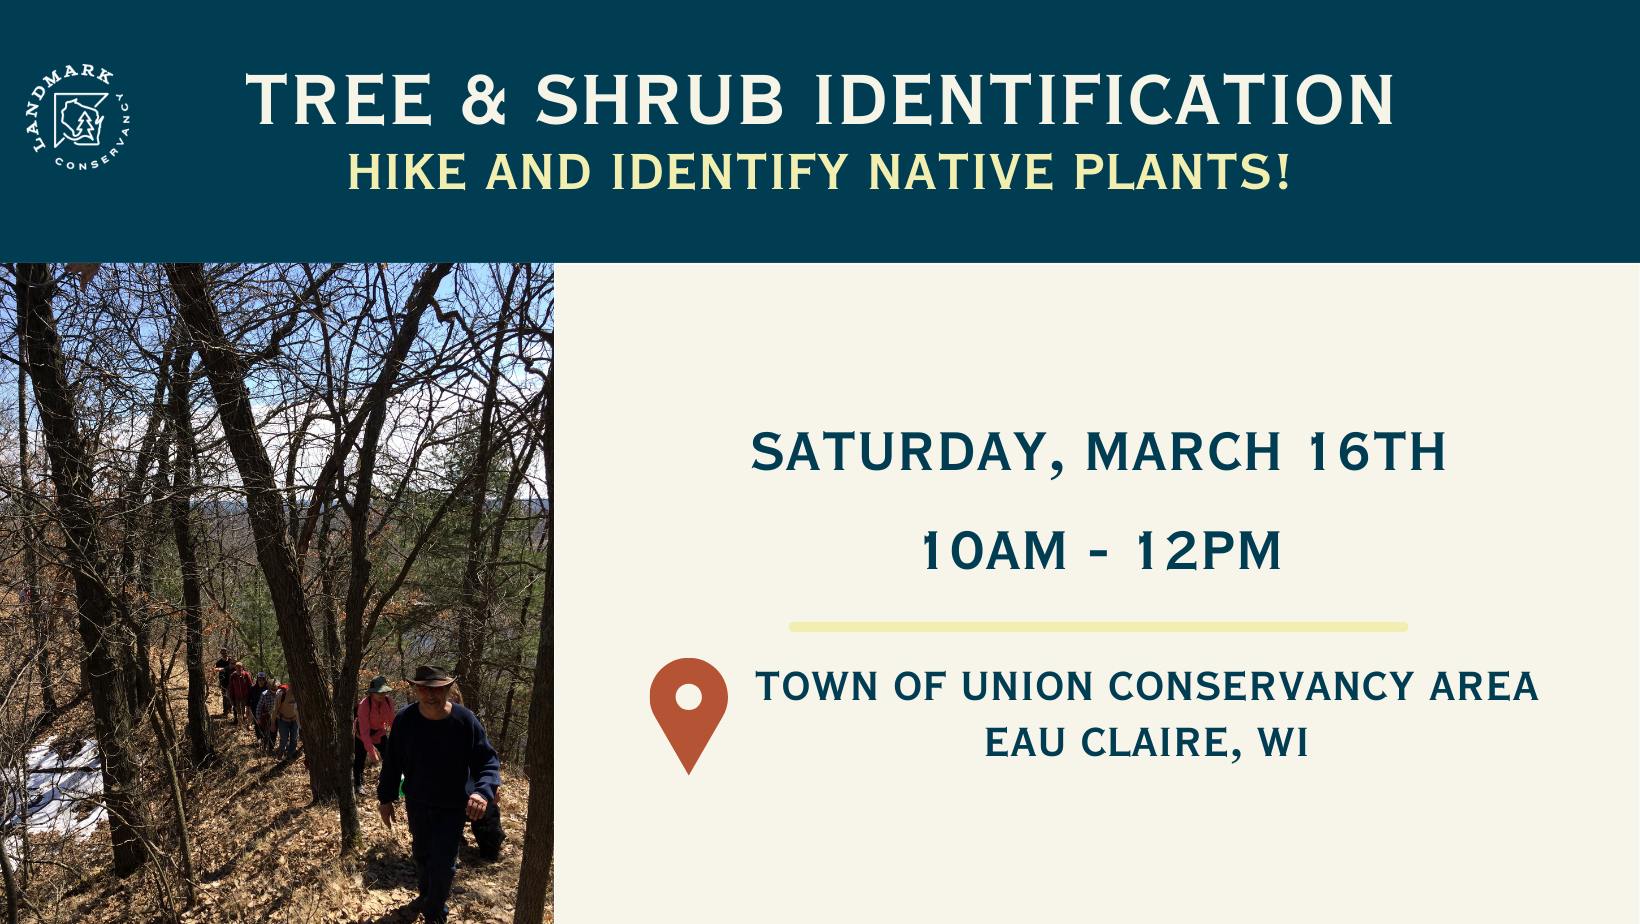 Promo for Tree and Shrub ID event with a picture of a person walking through a forest.